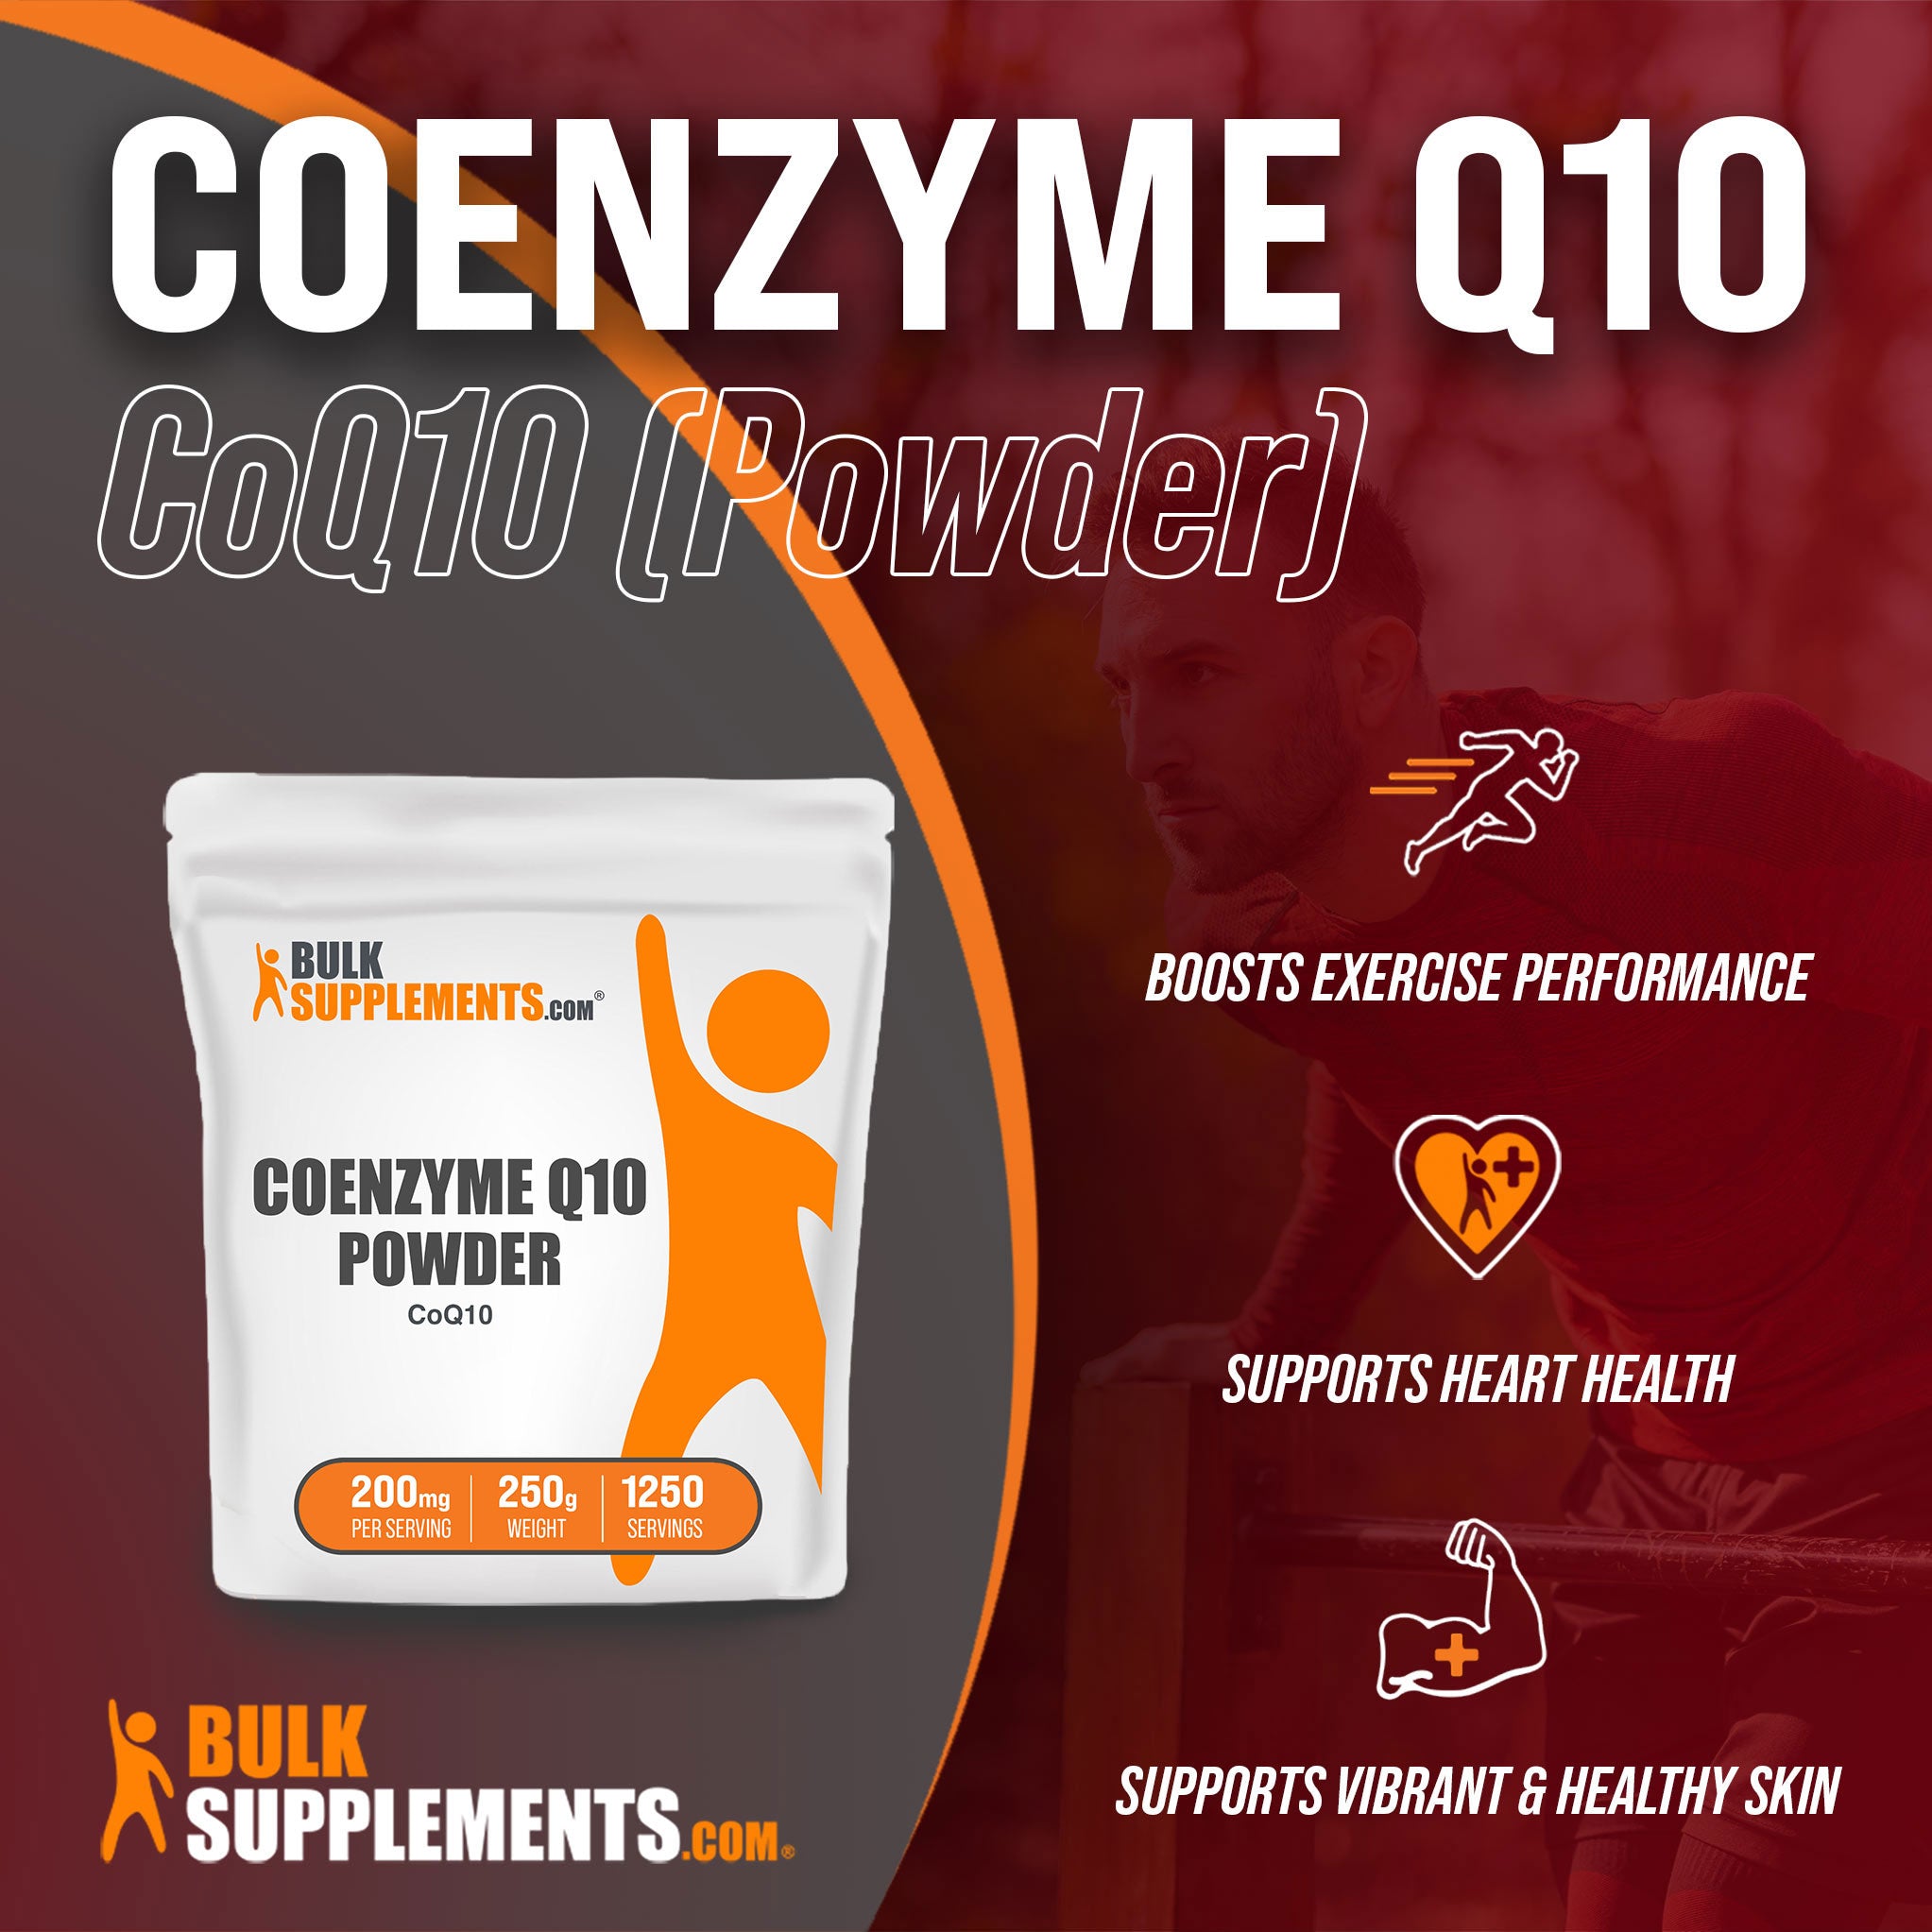 Benefits of Coenzyme Q10 CoQ10 Powder; boosts exercise performance, supports heart health, supports vibrant & healthy skin